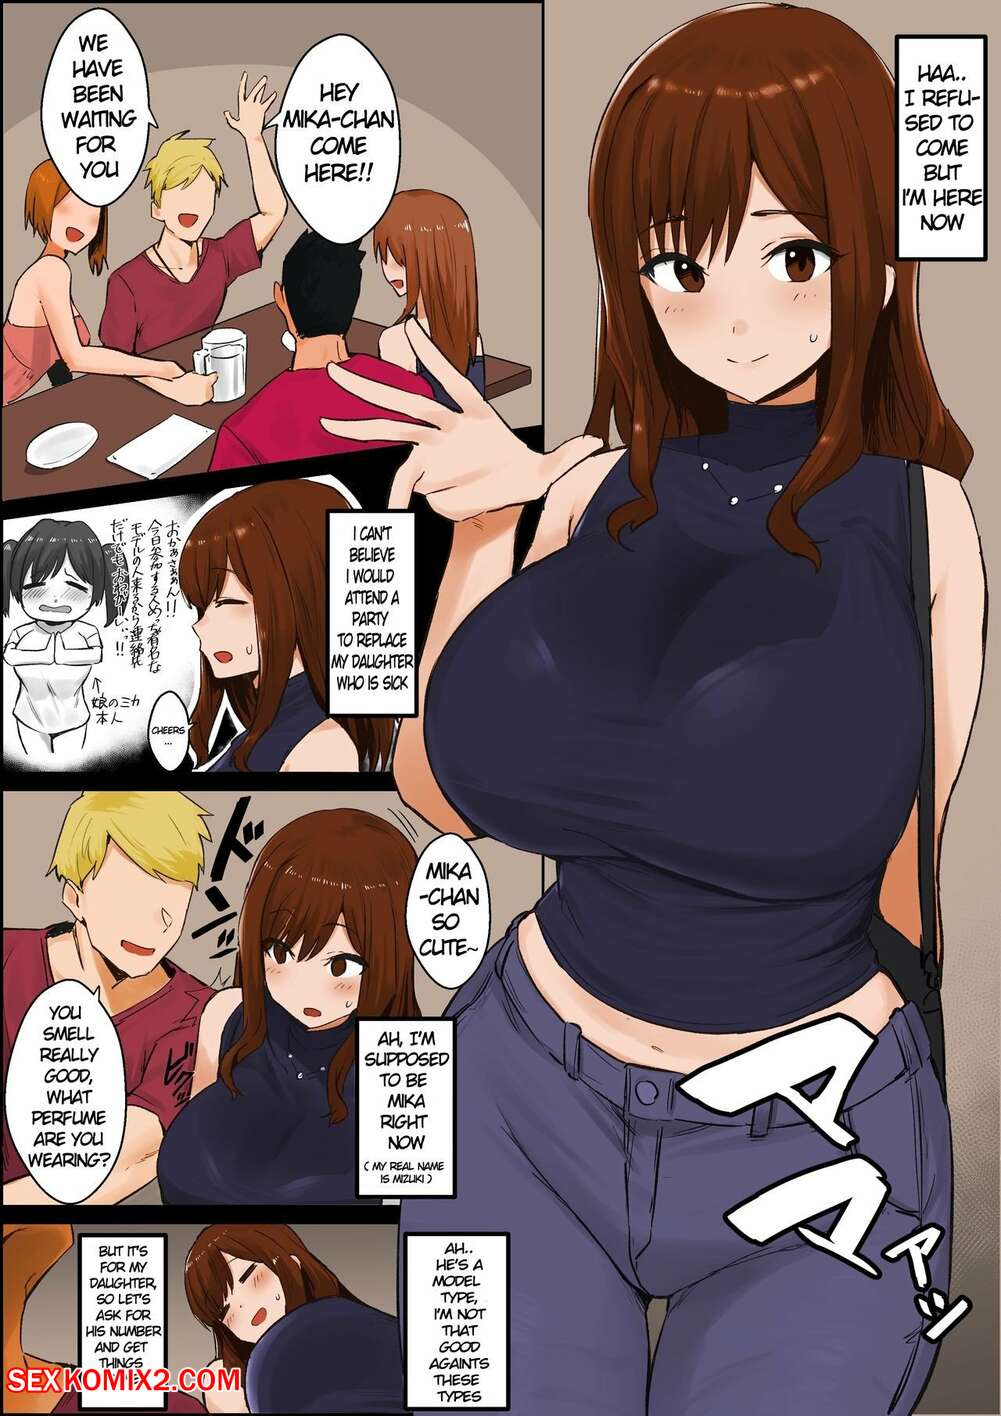 Is this form of hentai porn comic